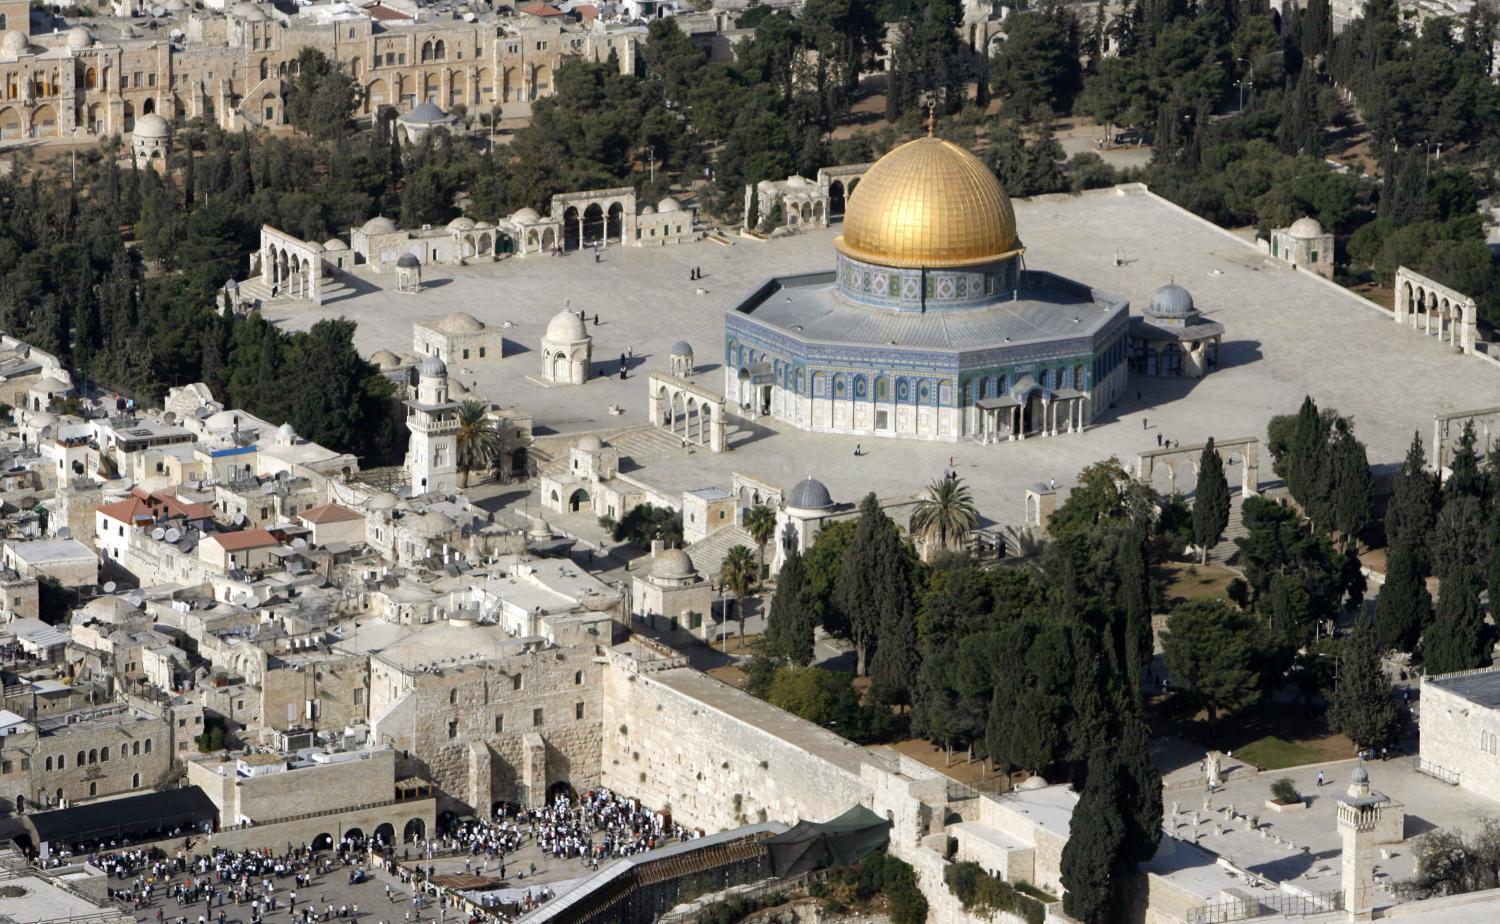 An aerial view shows the Dome of the Rock (R) on the compound known to Muslims as the Noble Sanctuary and to Jews as Temple Mount, and the Western Wall (L) in Jerusalem's Old City.